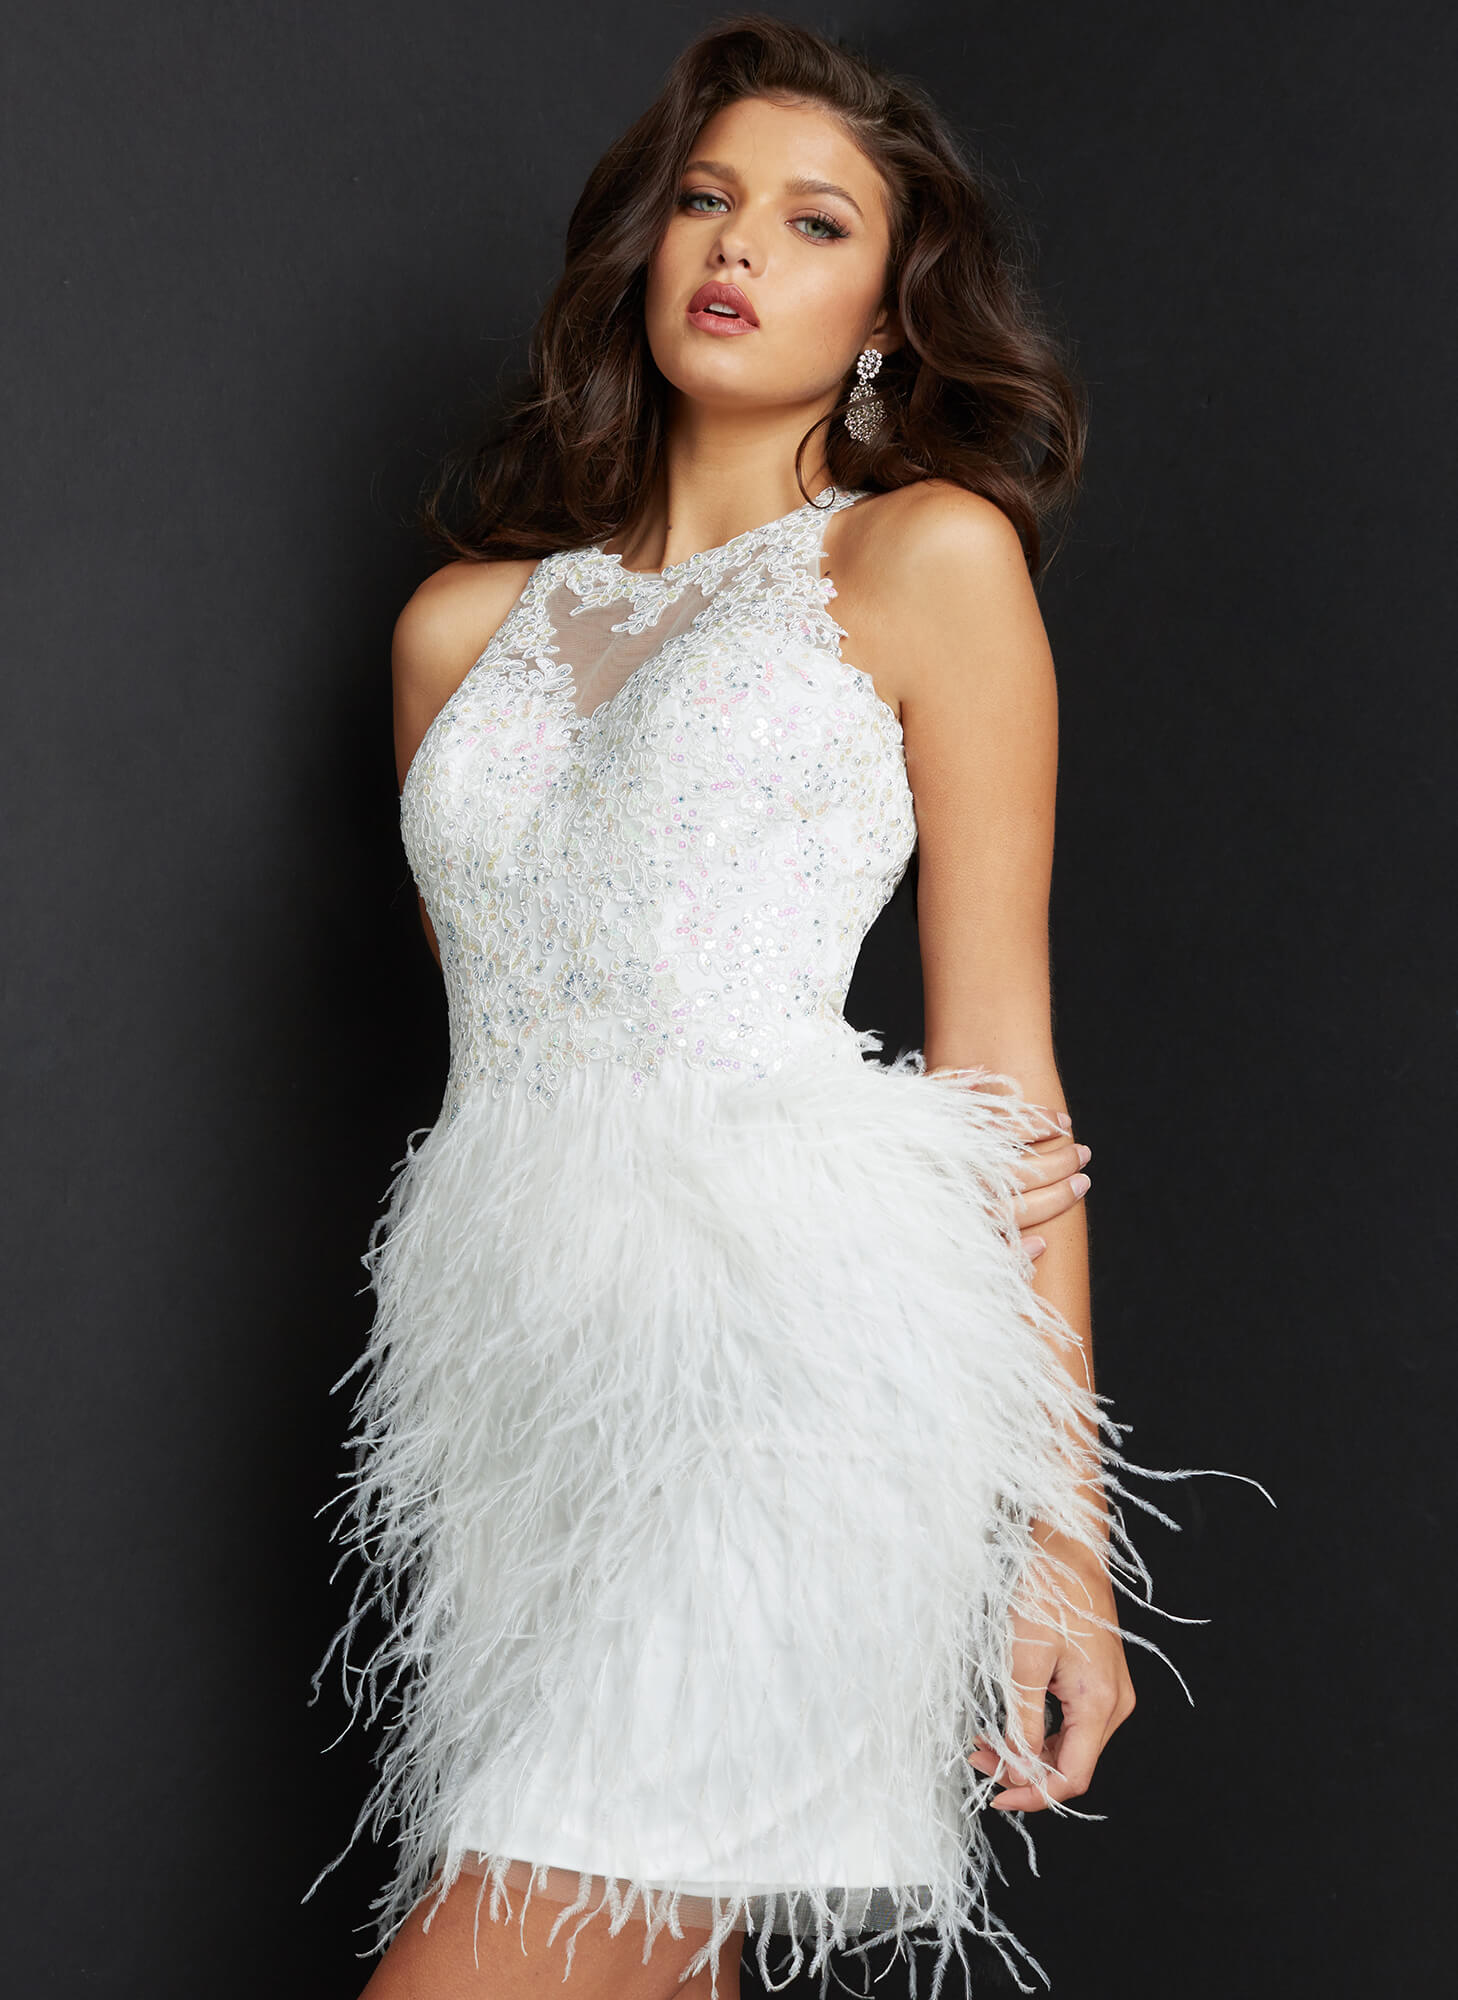 Jovani JVN07895 Feather Trimmed Lace Cocktail Dress Short Homecoming Dress.  Short form fitting off white homecoming dress features feather skirt and lace sleeveless bodice with high illusion neckline.